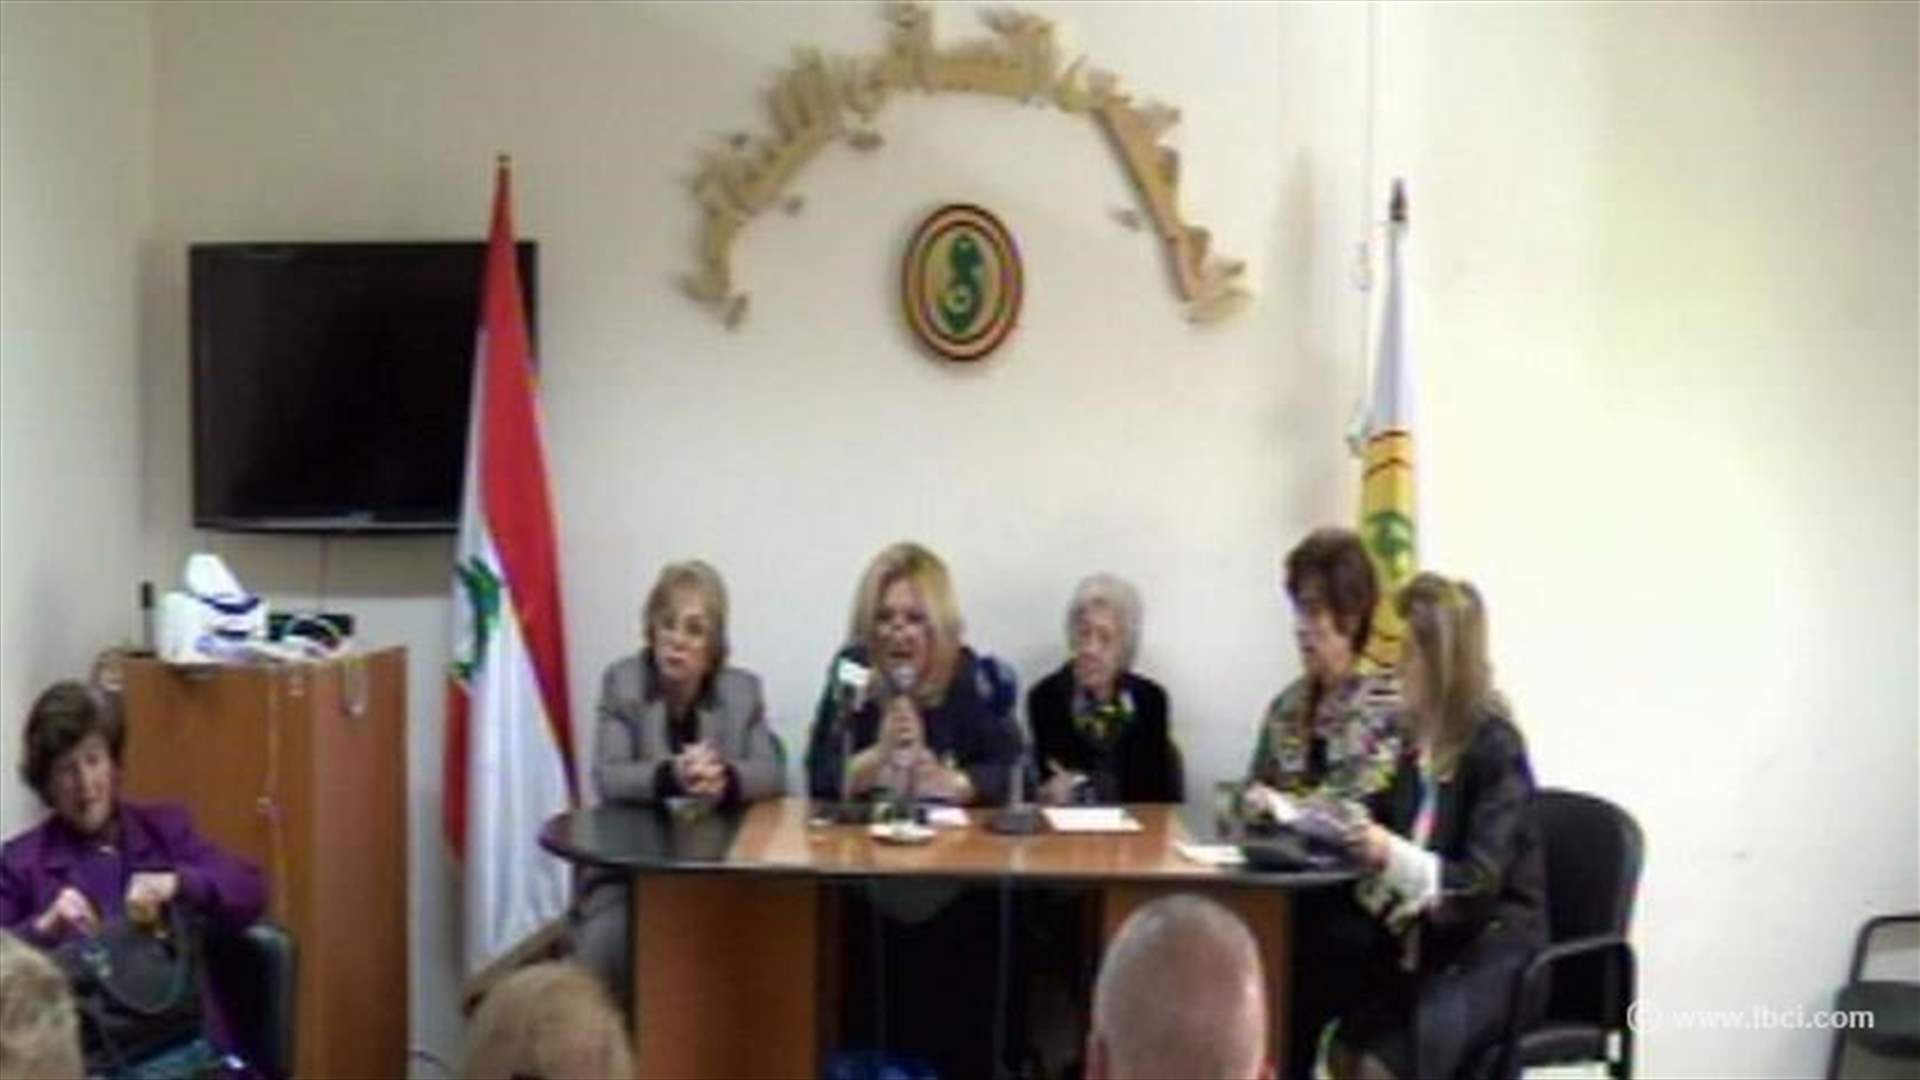 Lebanese Women’s Council calls for prosecuting “prostitution mafia heads” instead of victims